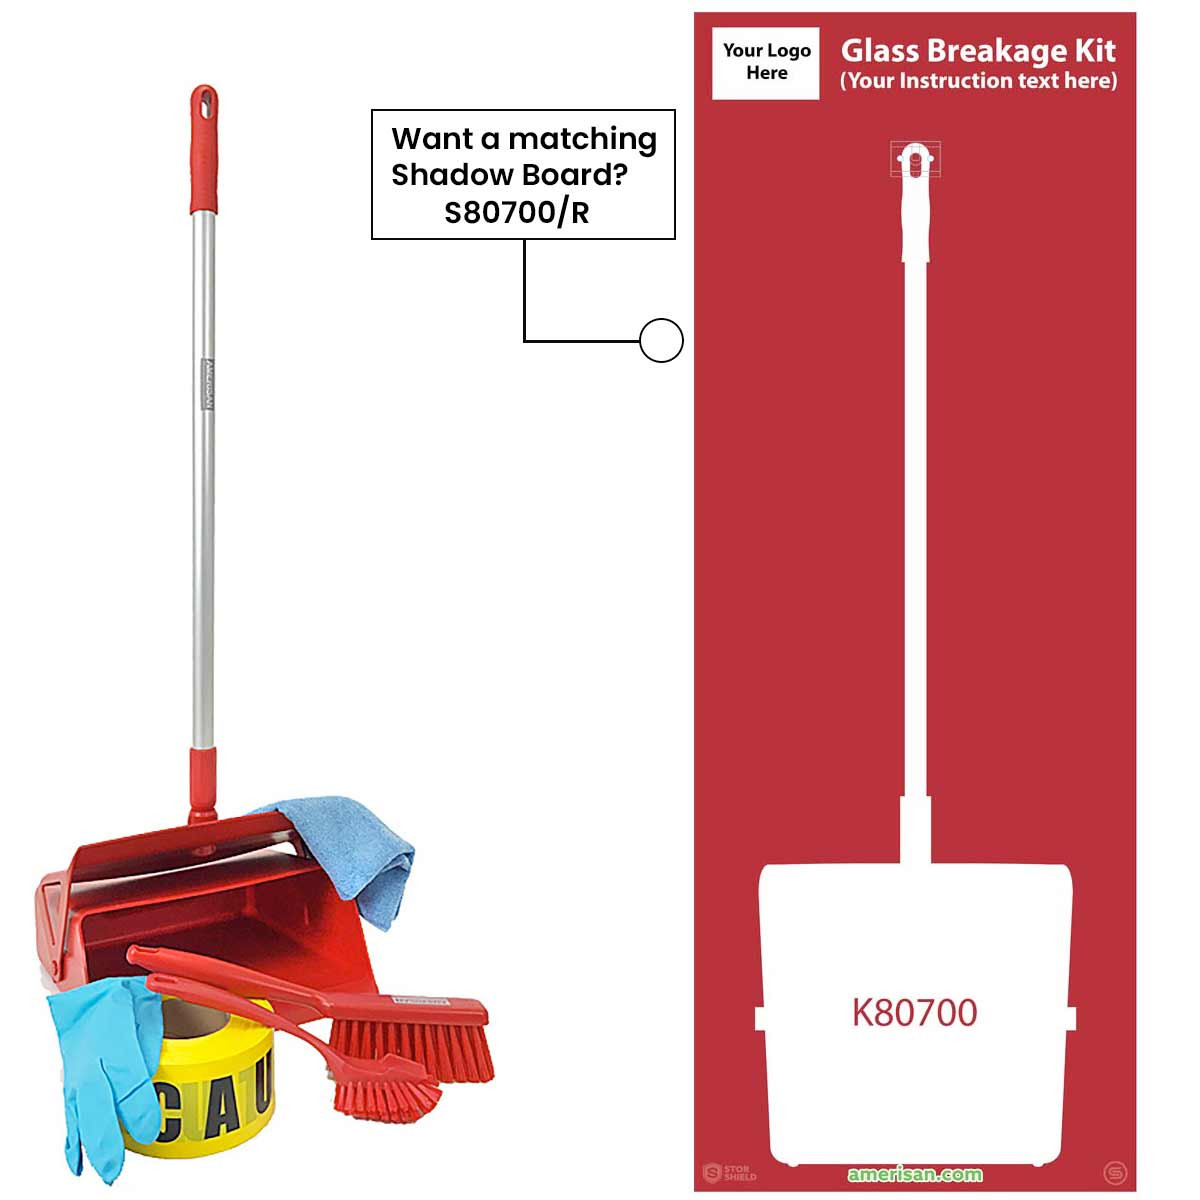 The perfect match to clean up broken glass.
Safe, efficient, and hygienic. 
Glass Clean-up Kit + Shadow board. 

amerisan.com/shop-by-catego…

#shadowboard #hygiene #foodindustry